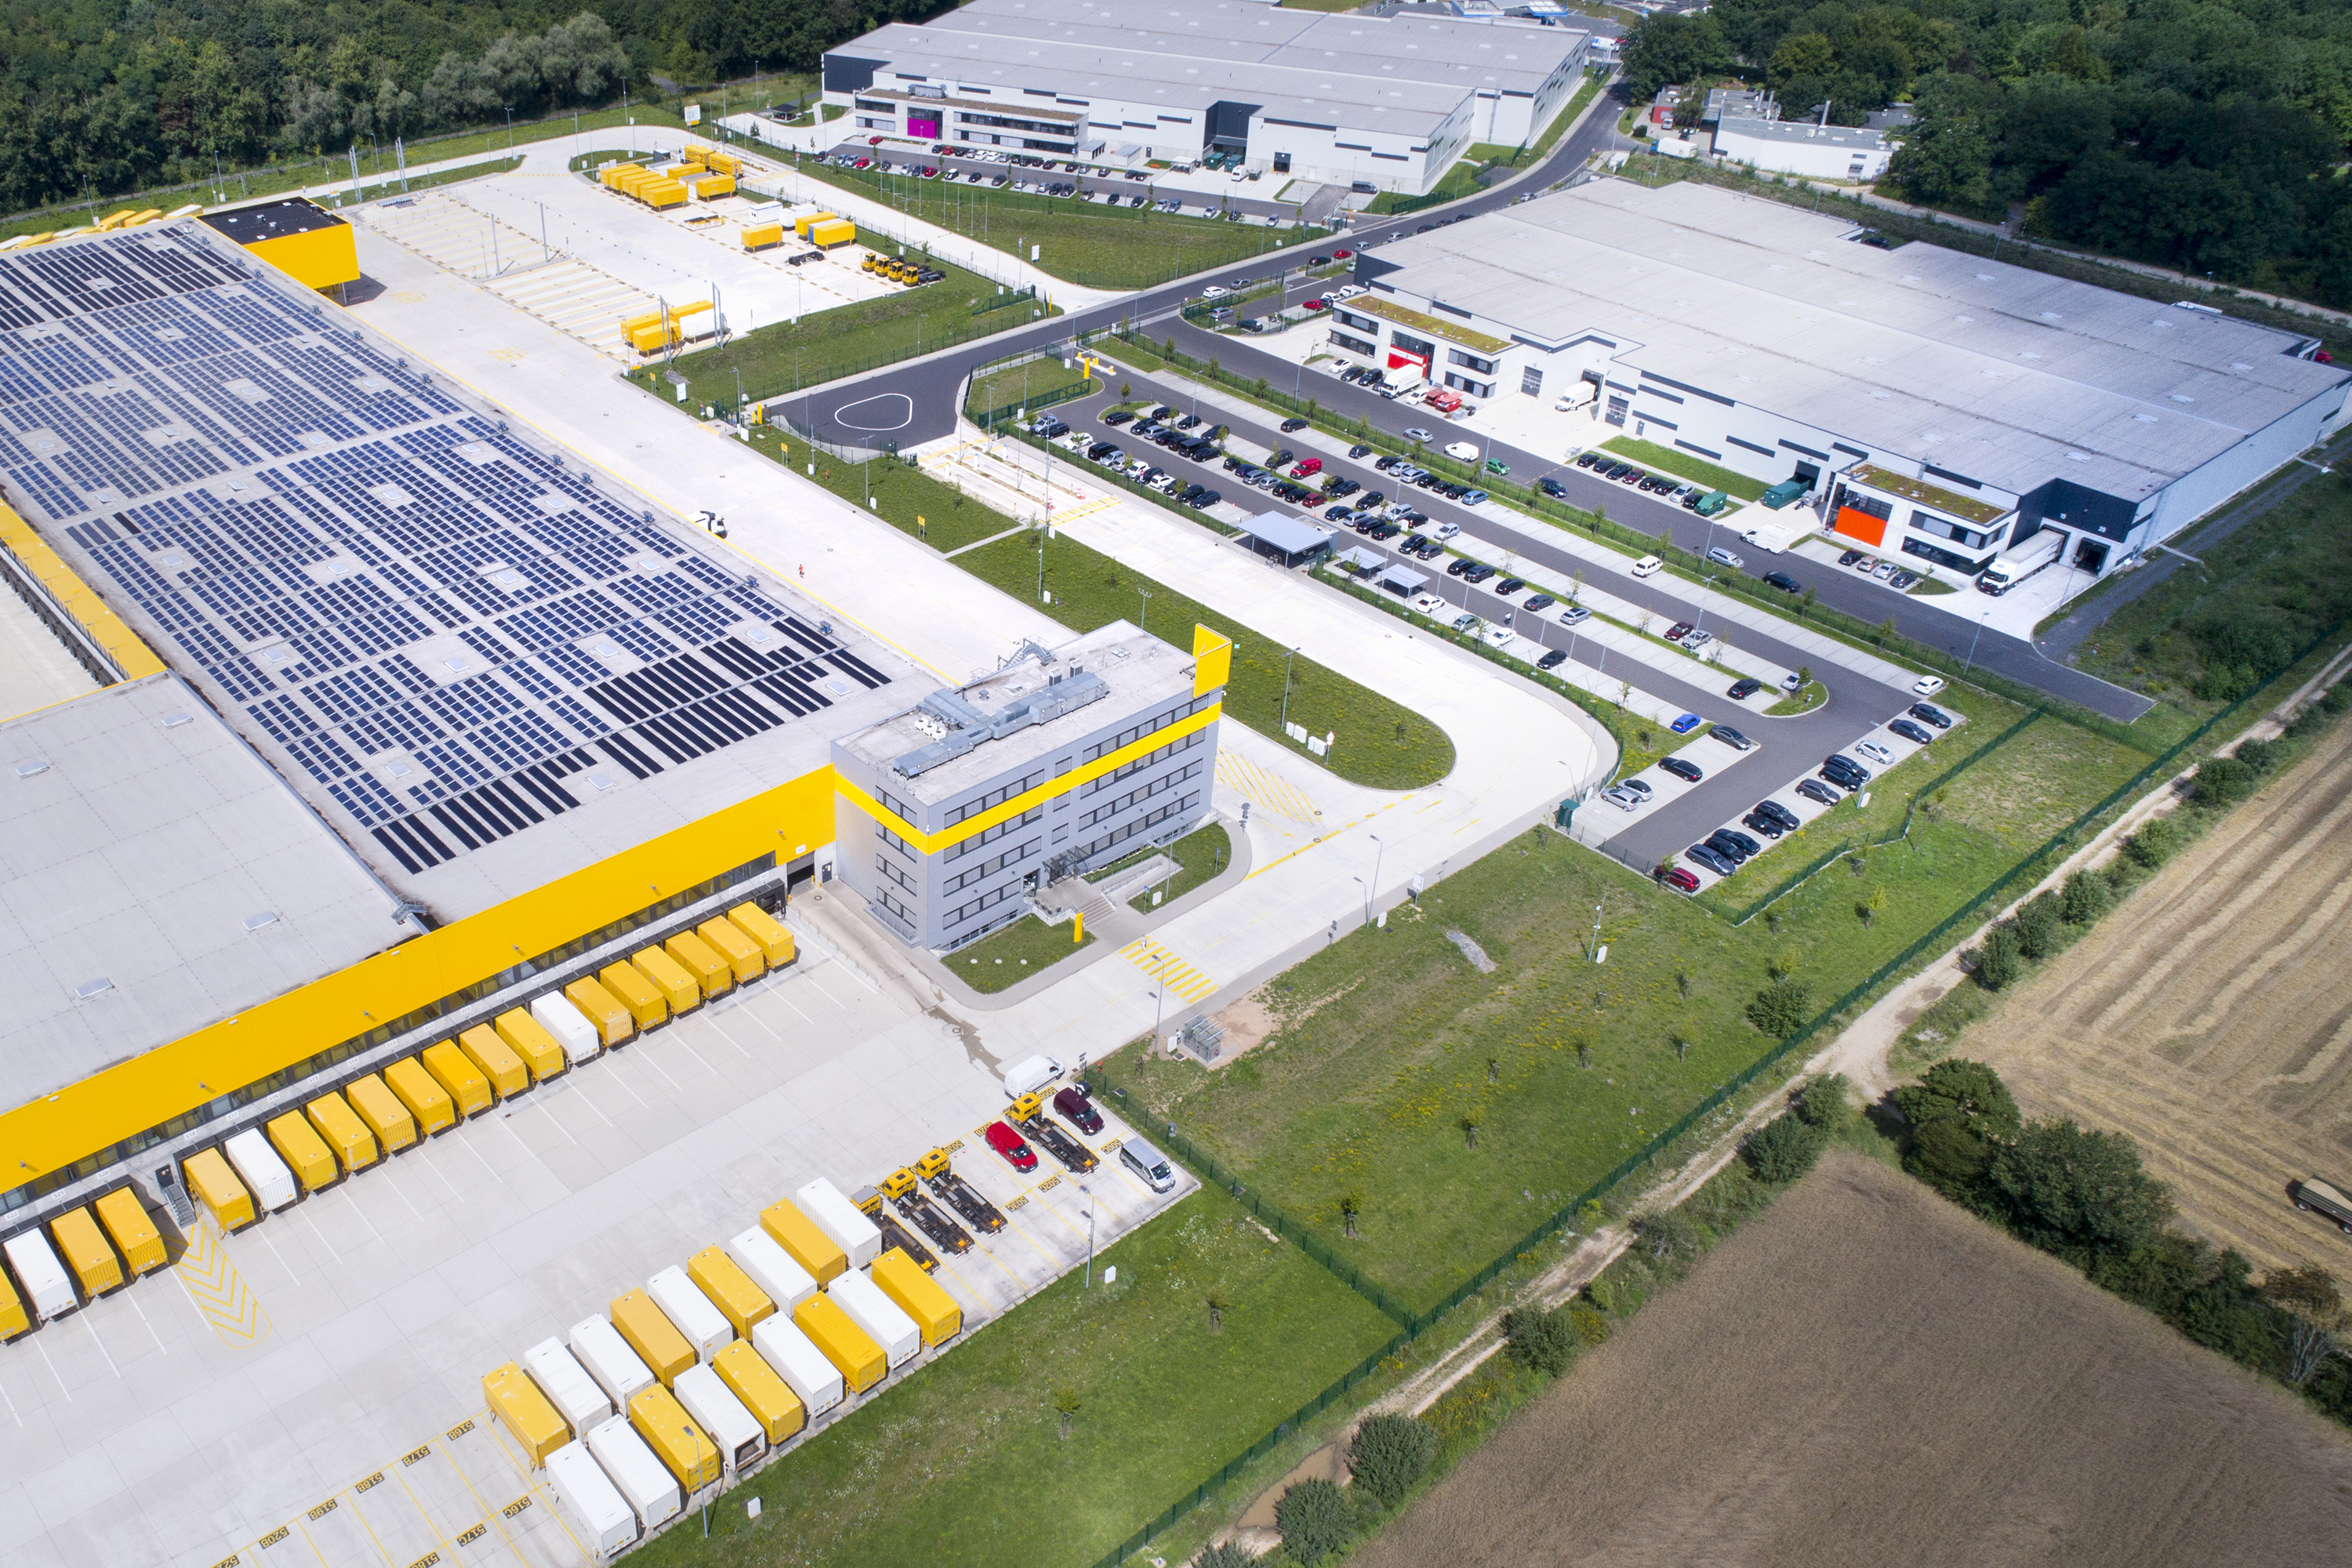 From XXS to XXL: Towards a typology of distribution centre facilities